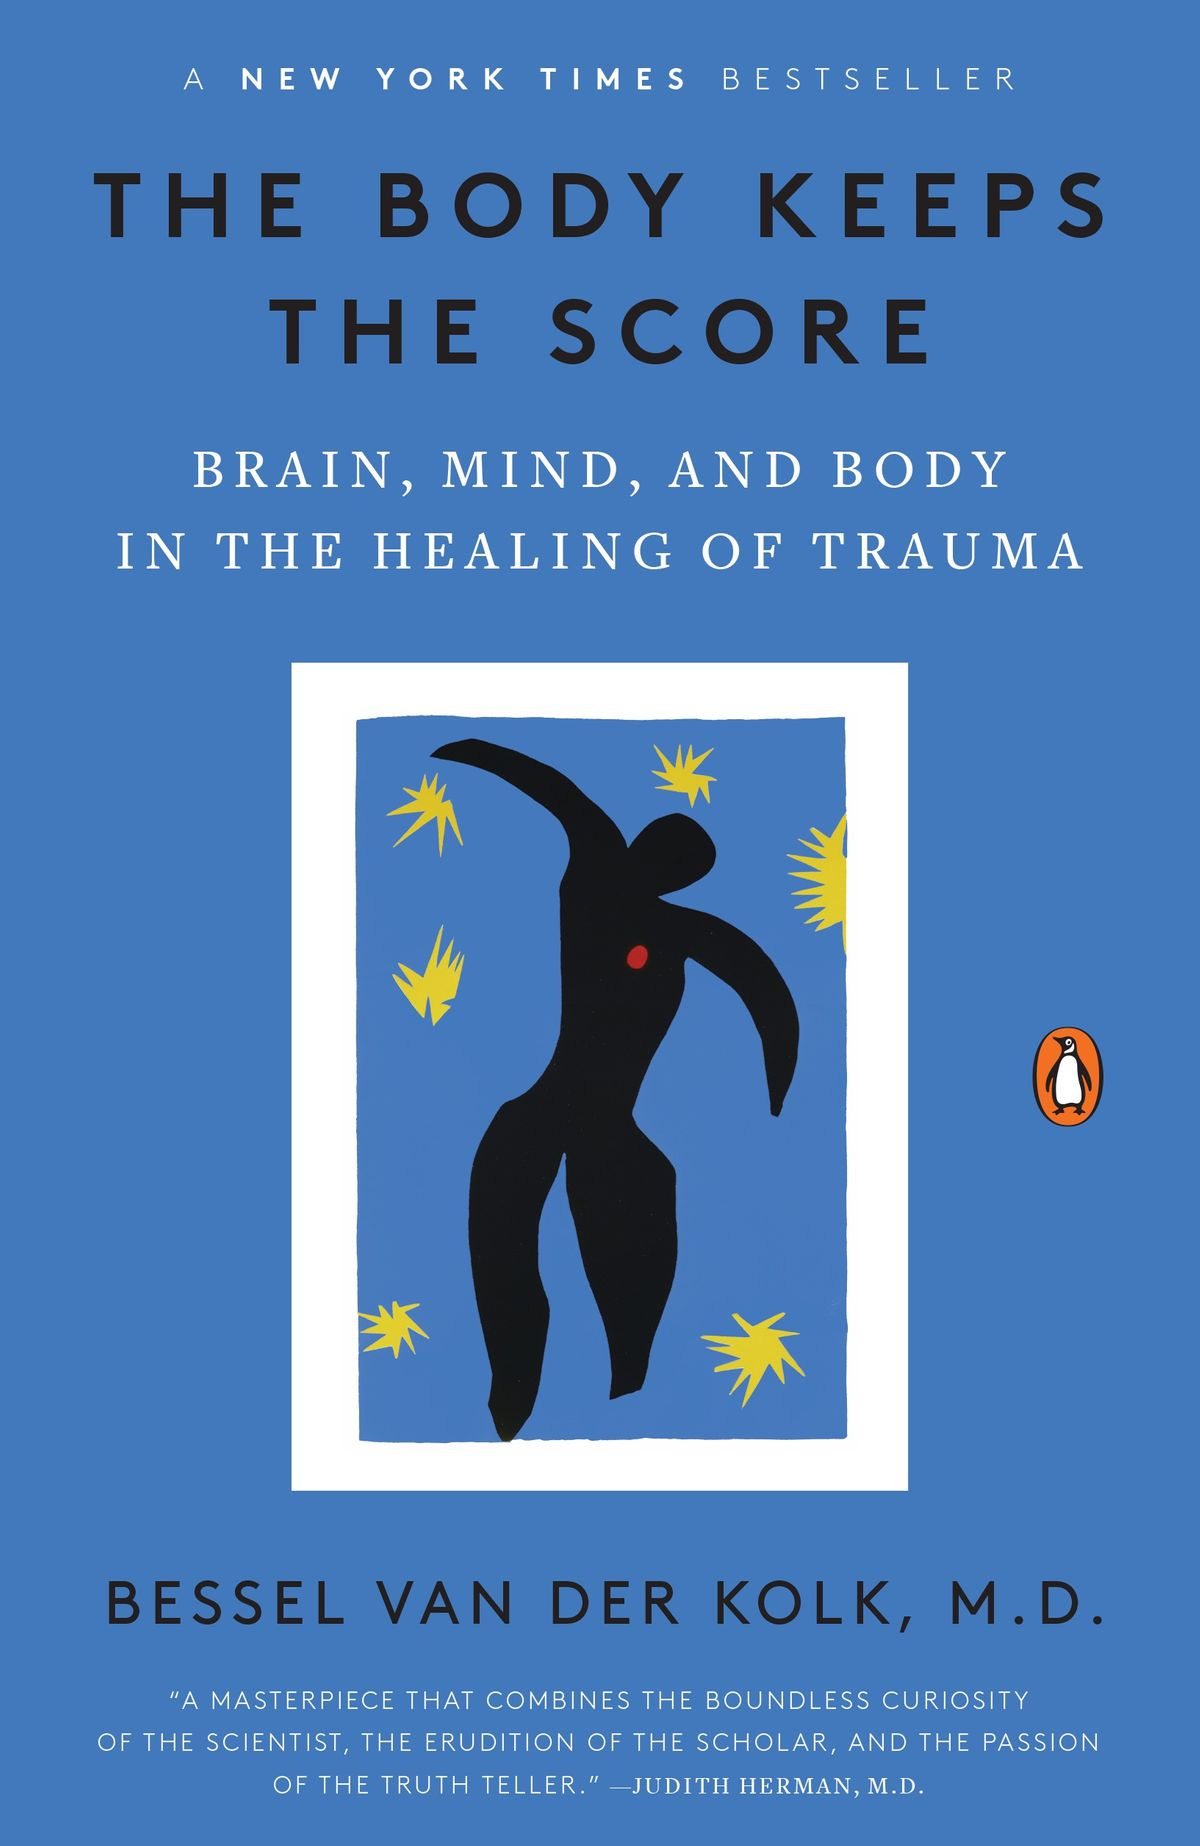 The Body Keeps the Score: Brain, Mind, and Body in the Healing of Trauma by  Bessel van der Kolk | Goodreads